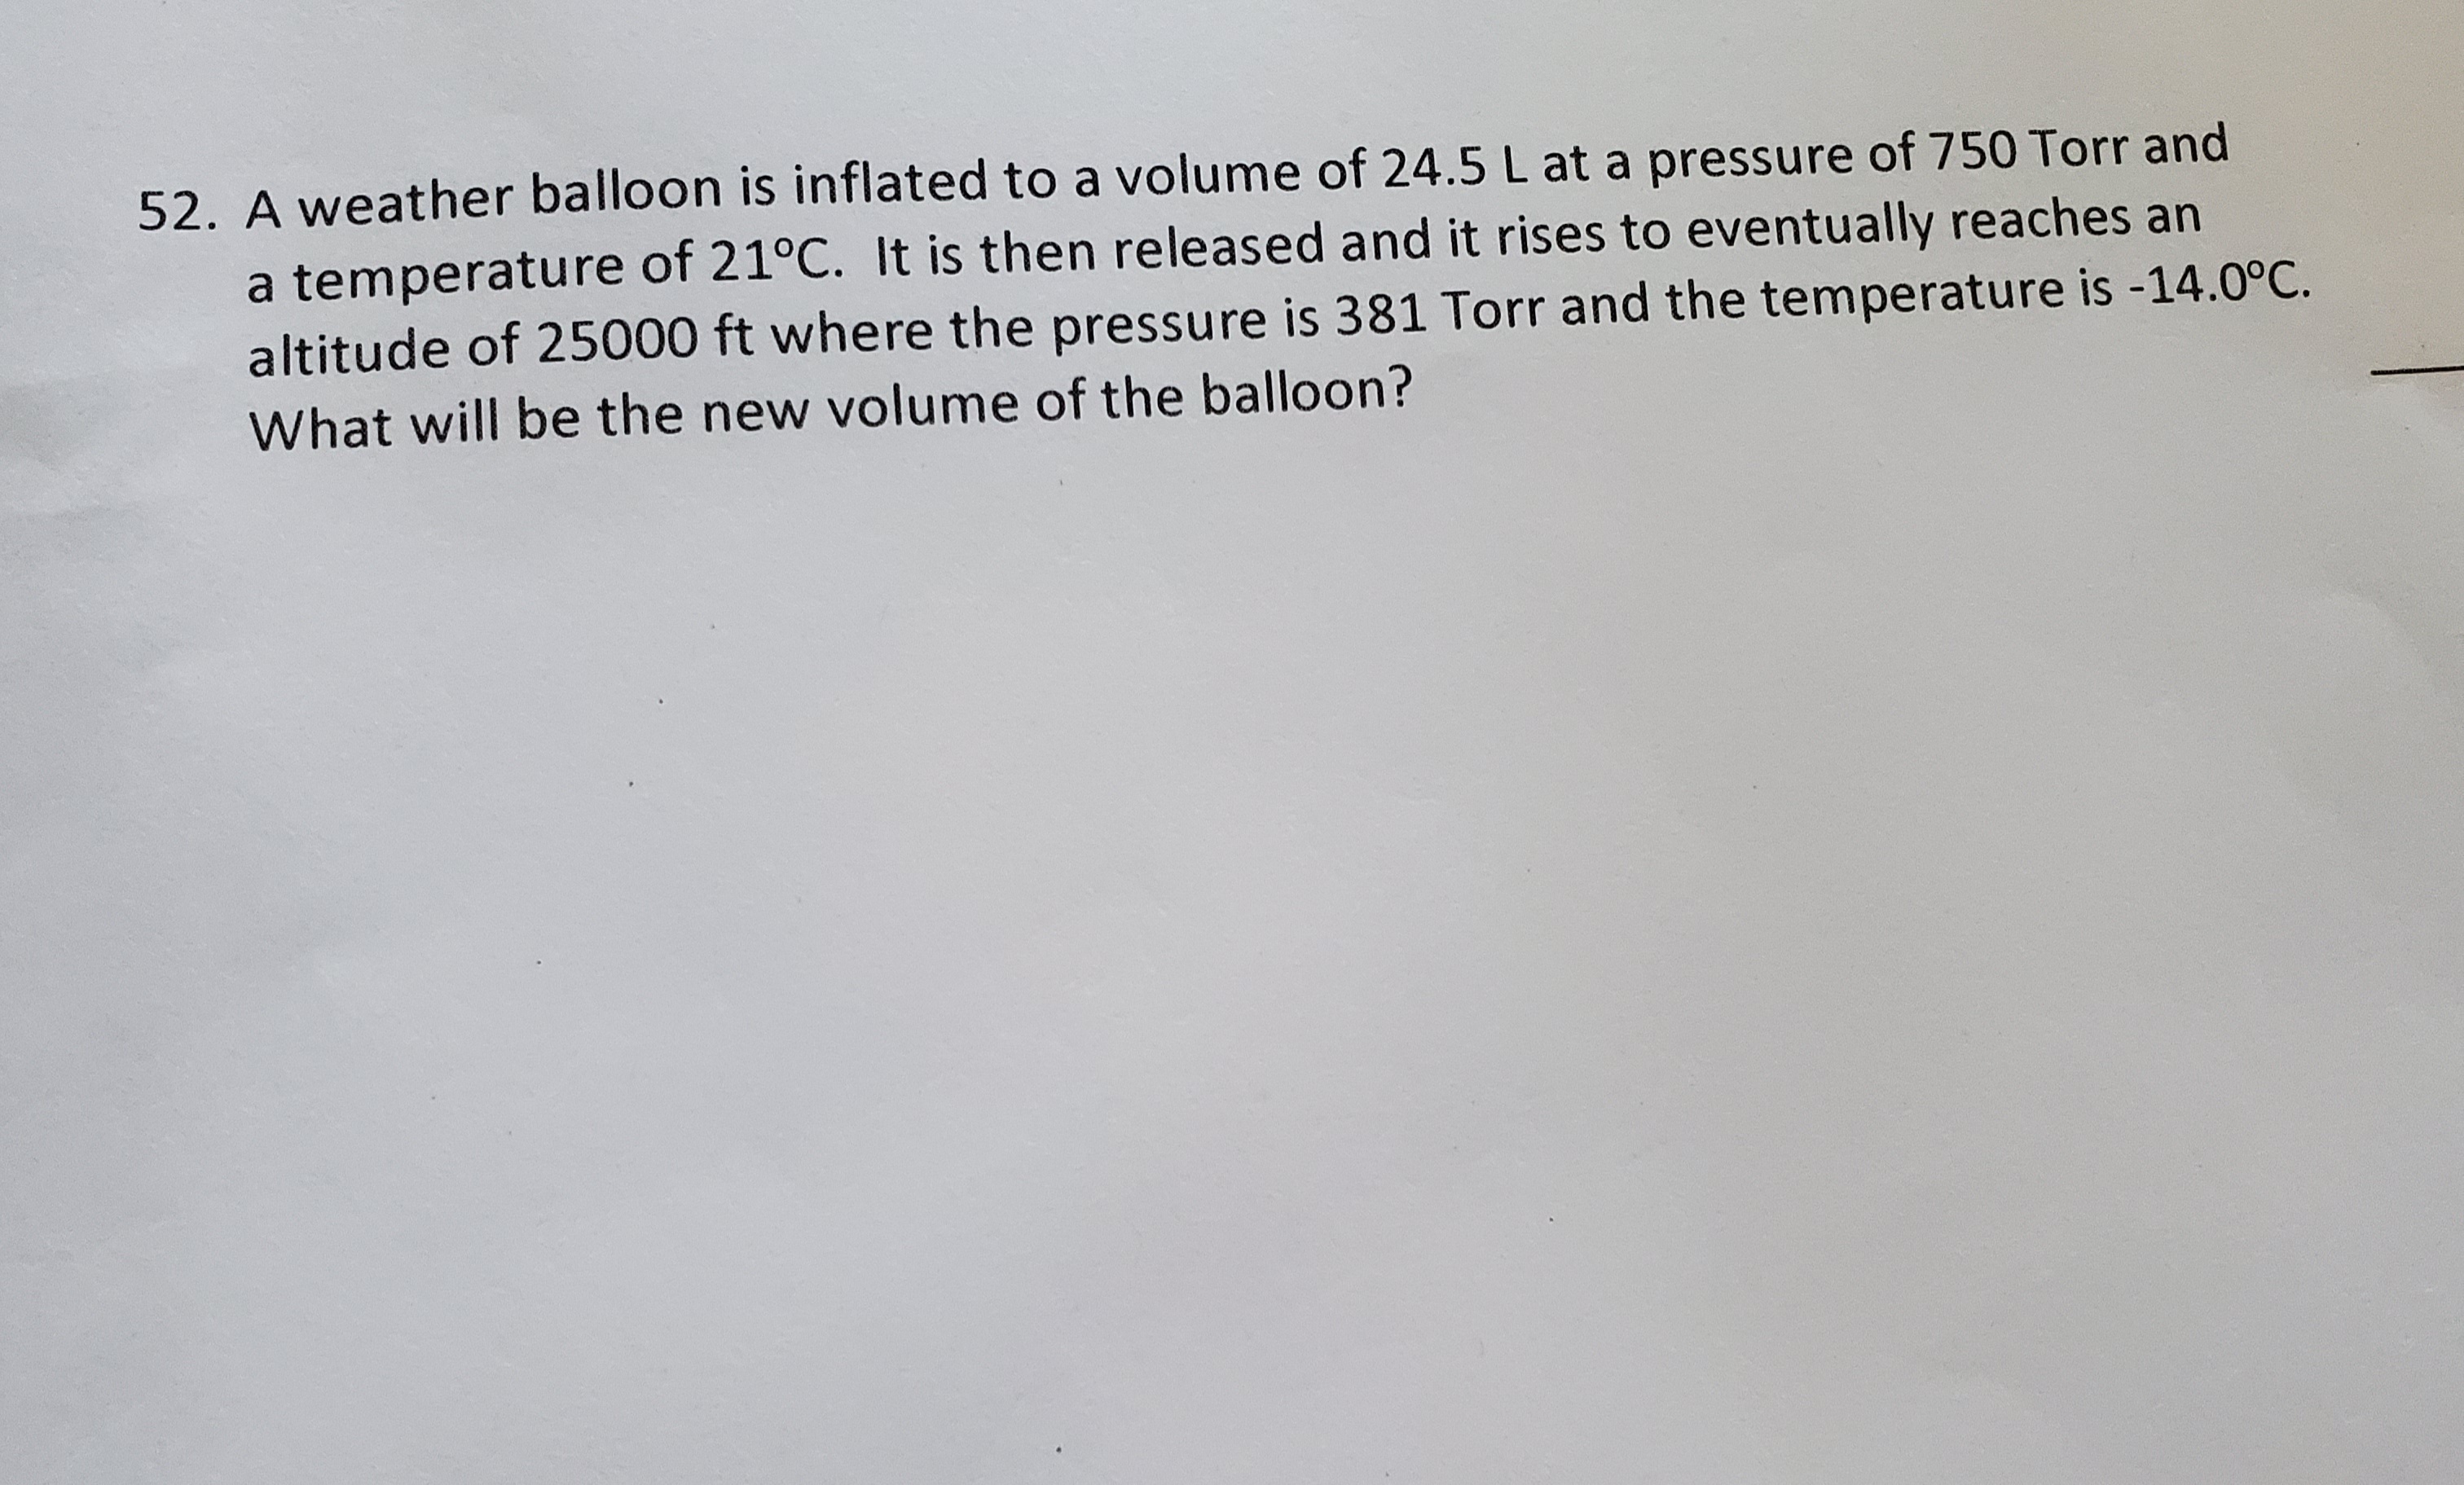 A weather balloon is inflated to a volume of 24.5 L at a pressure of 750 Torr and
a temperature of 21°C. It is then released and it rises to eventually reaches an
altitude of 25000 ft where the pressure is 381 Torr and the temperature is -14.0°C.
What will be the new volume of the balloon?
